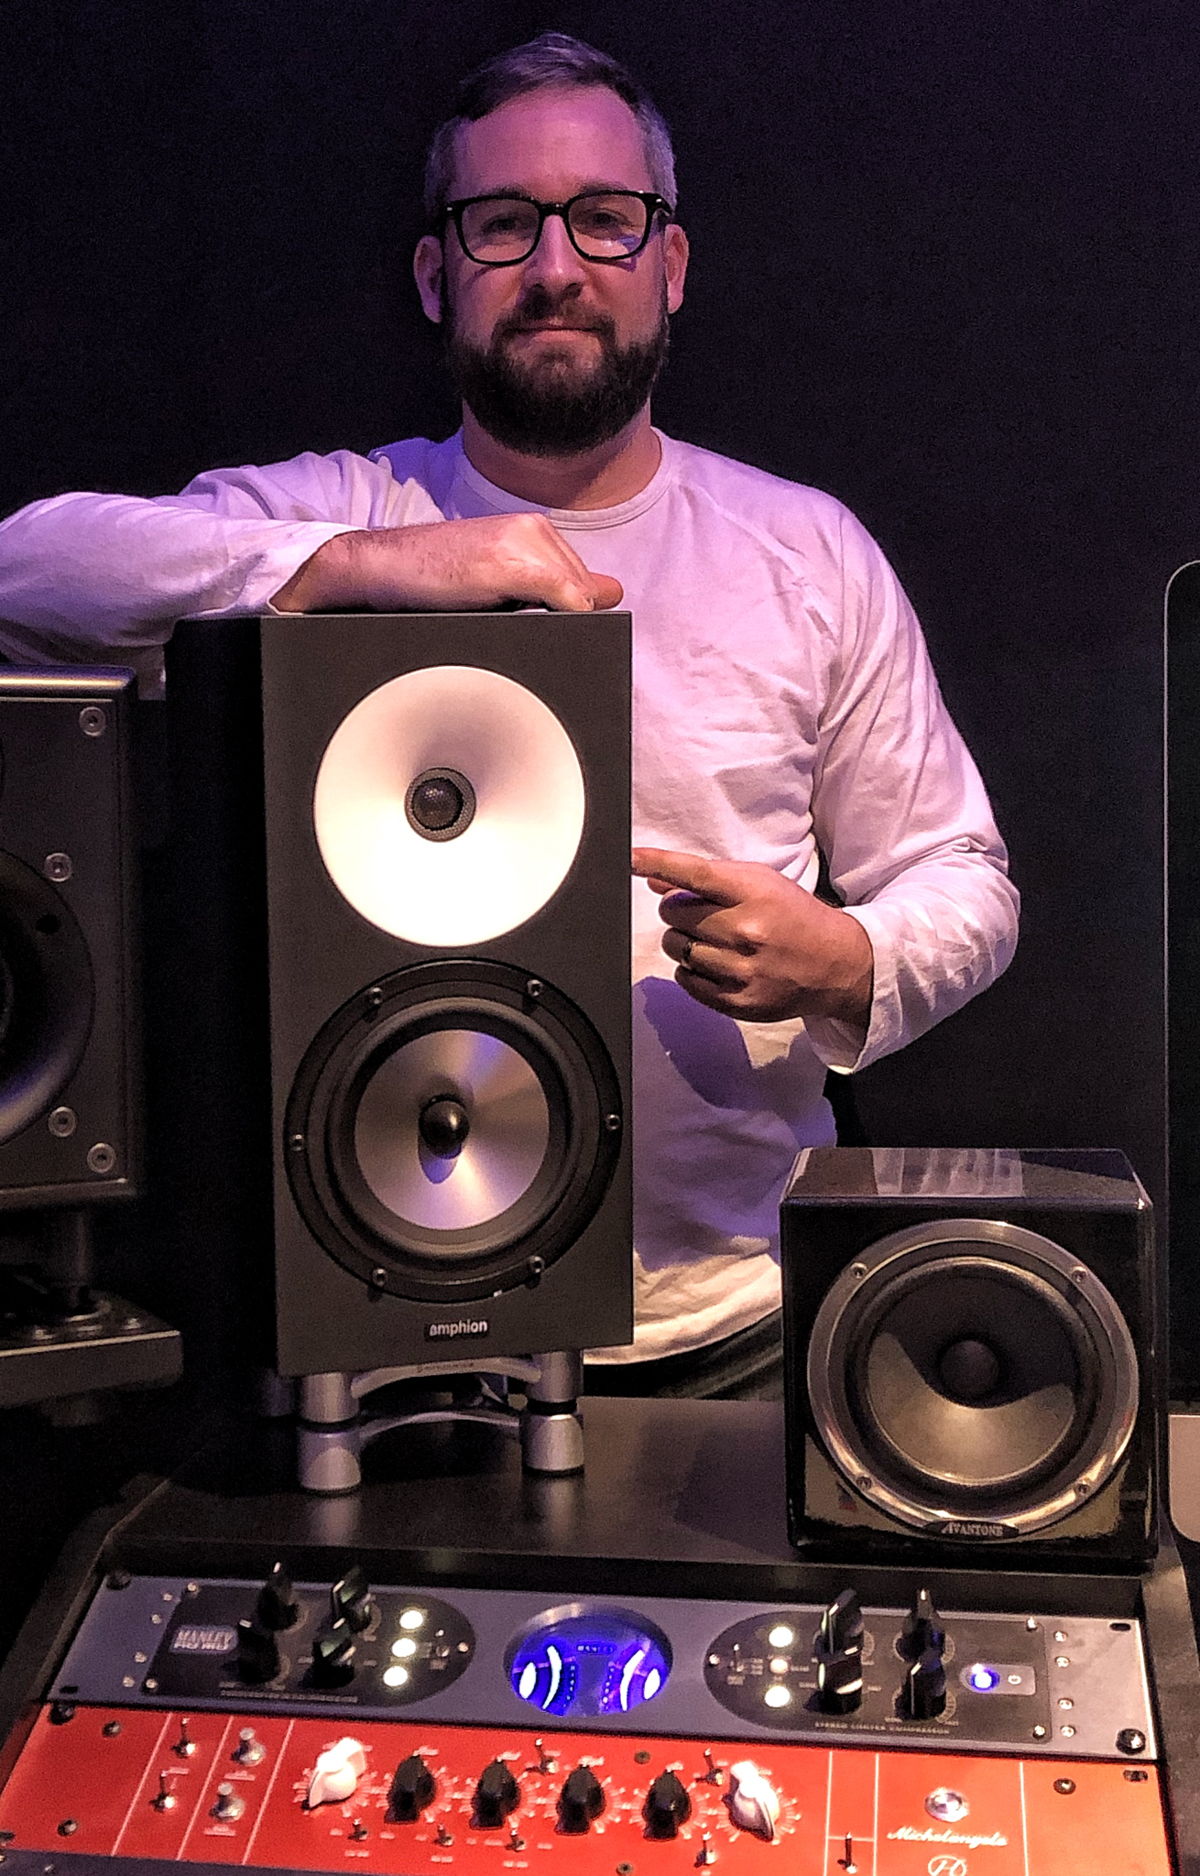 "I connected with Amphion because of how true to the source they are — you know exactly what you are hearing and can see the bigger picture of a track right away."